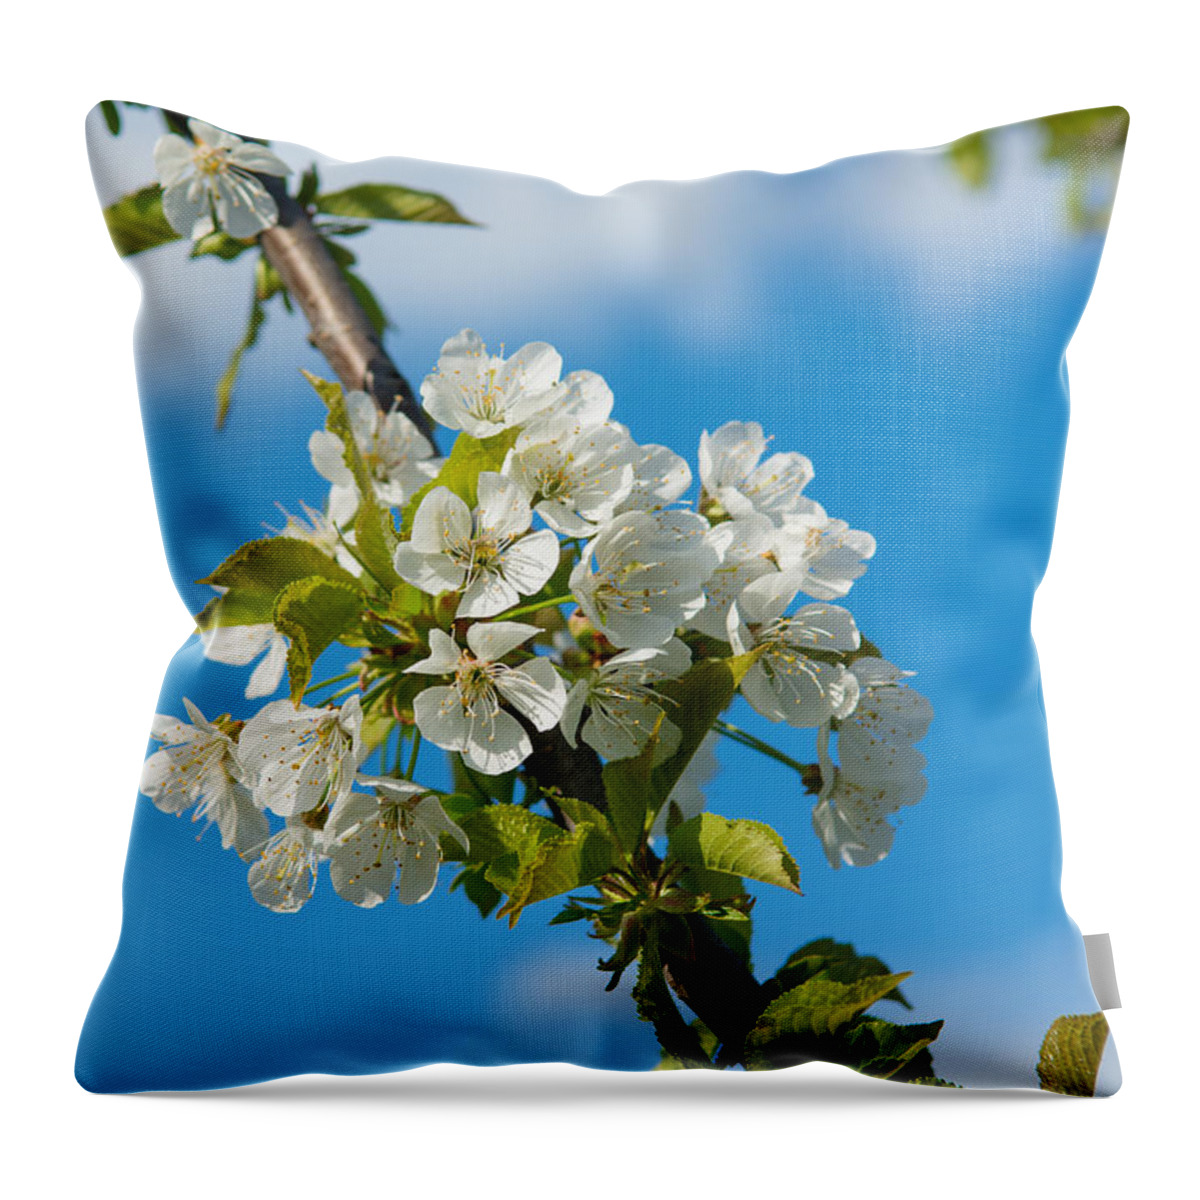 Cherry Throw Pillow featuring the photograph Cherry Tree Blossoms by Andreas Berthold